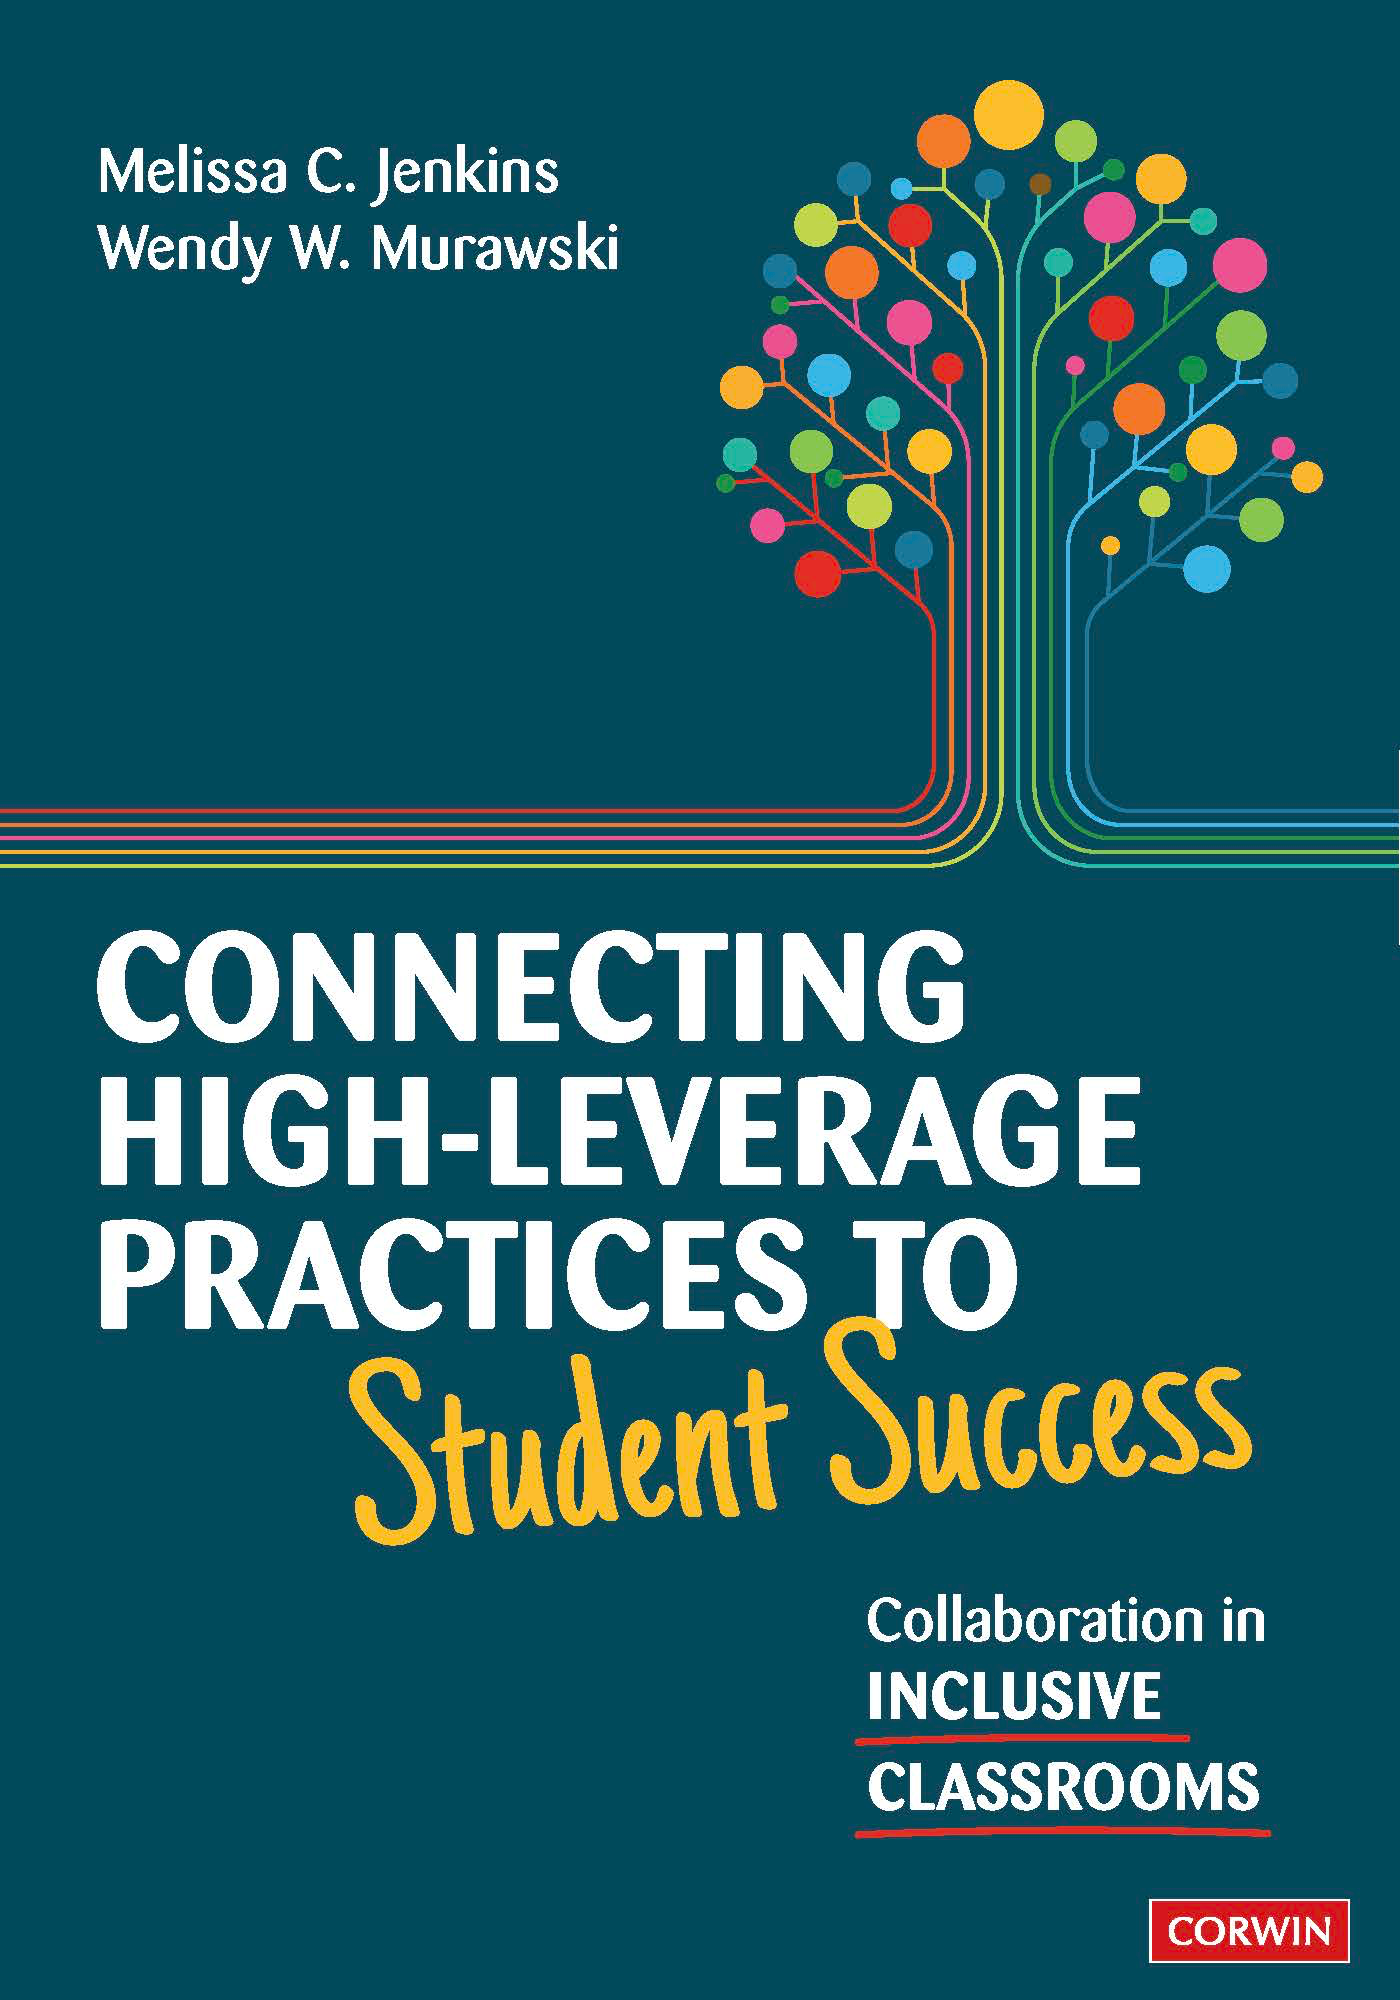 Connecting High-Leverage Practices to Student Success